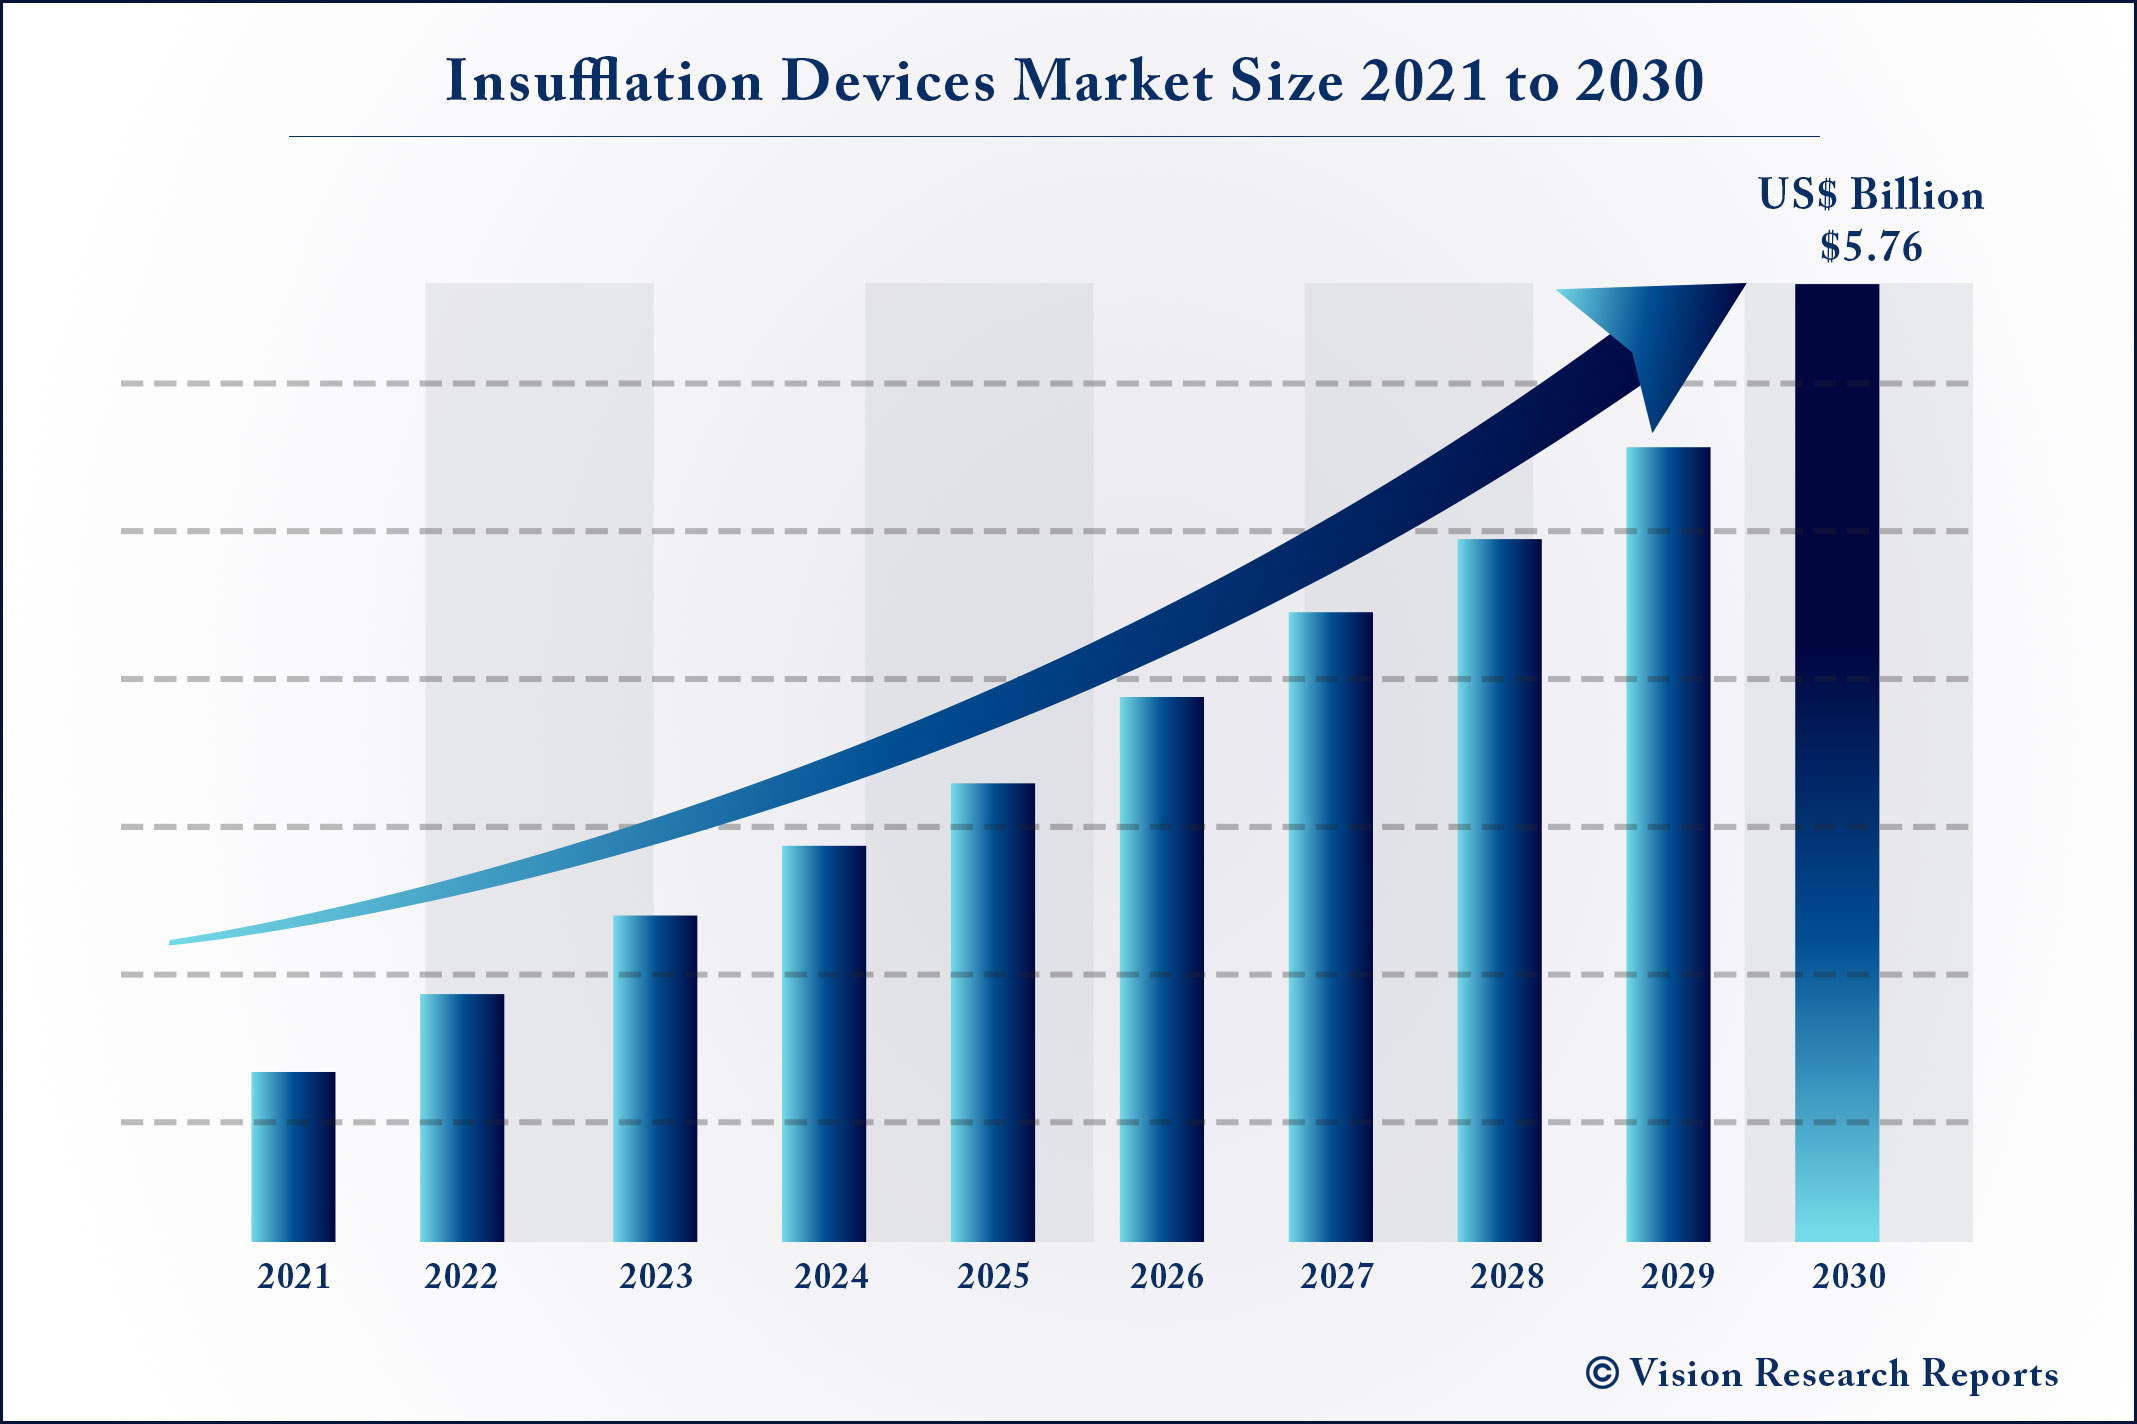 Insufflation Devices Market Size 2021 to 2030